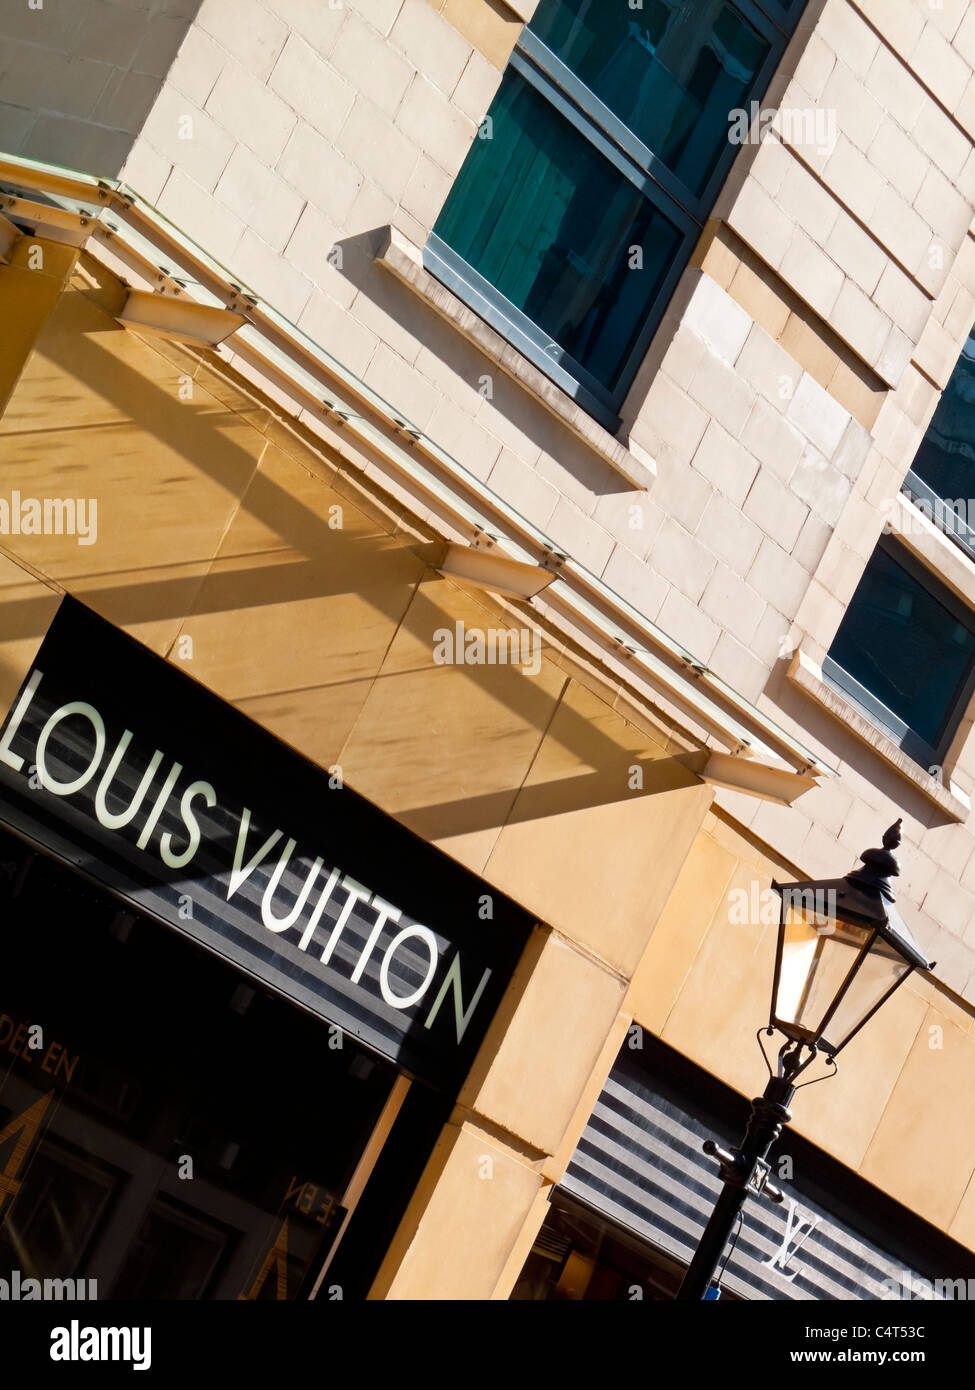 Louis Vuitton Logo on Signboard on Store Front in the Street Editorial  Stock Photo - Image of front, brand: 171828178